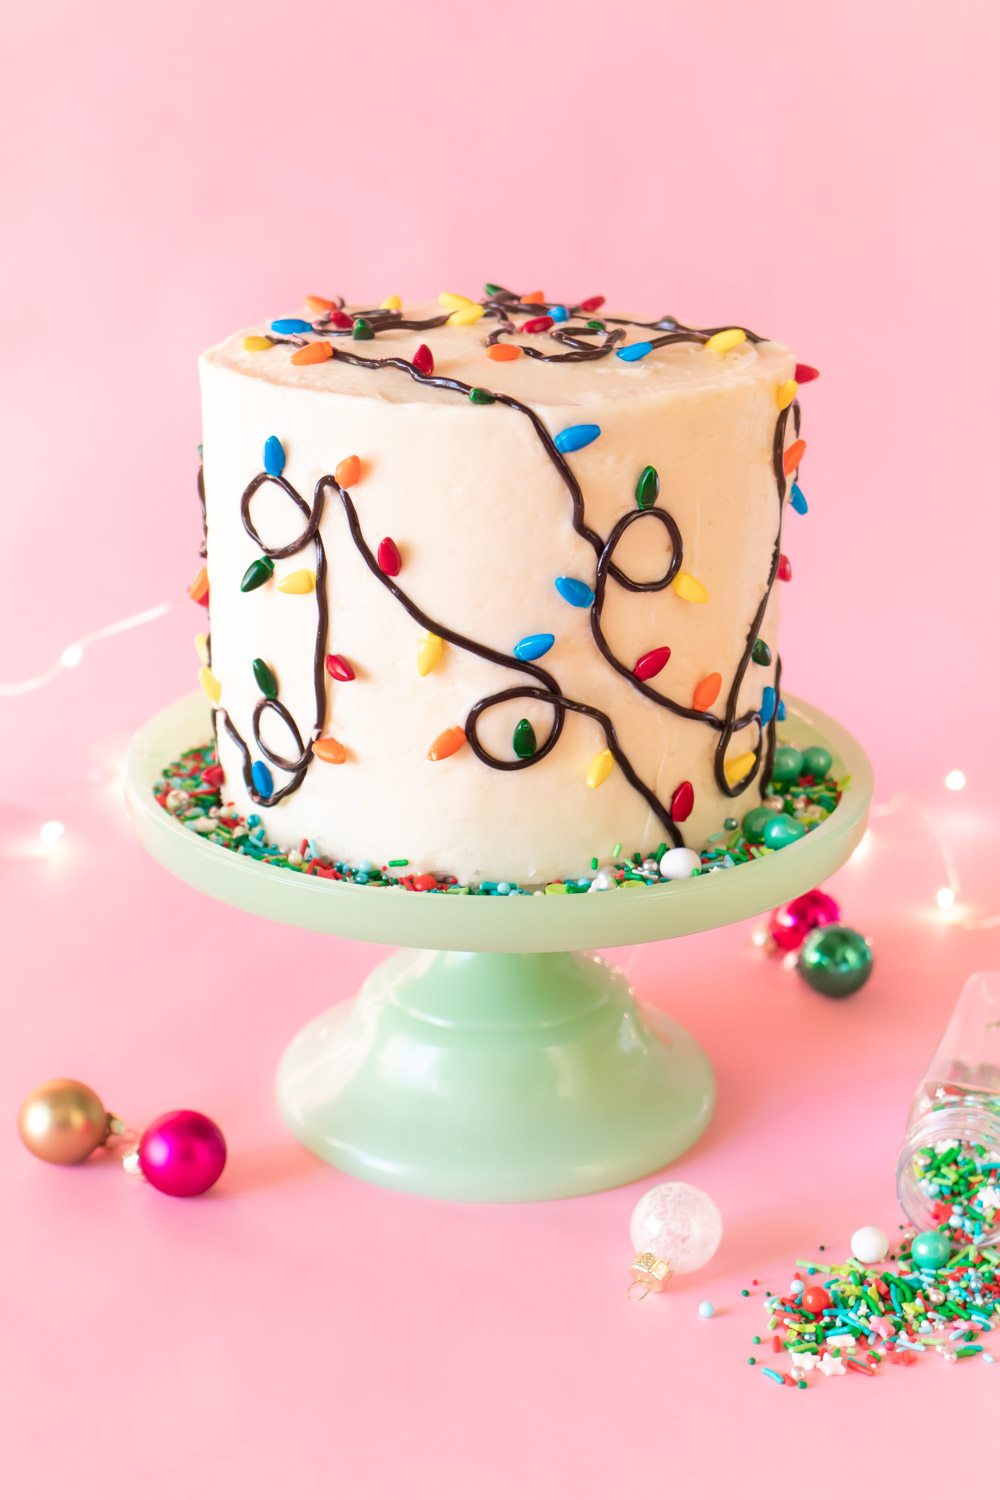 Easy Christmas Light Cake // Make this easy Christmas cake with Wilton sprinkles and licorice strands! Celebrate your holiday party in style with an easy cake decorating idea #christmas #christmasdessert #foodart #cakedecorating #christmasdiy #christmaslights #layercake #christmascake #holidayfood